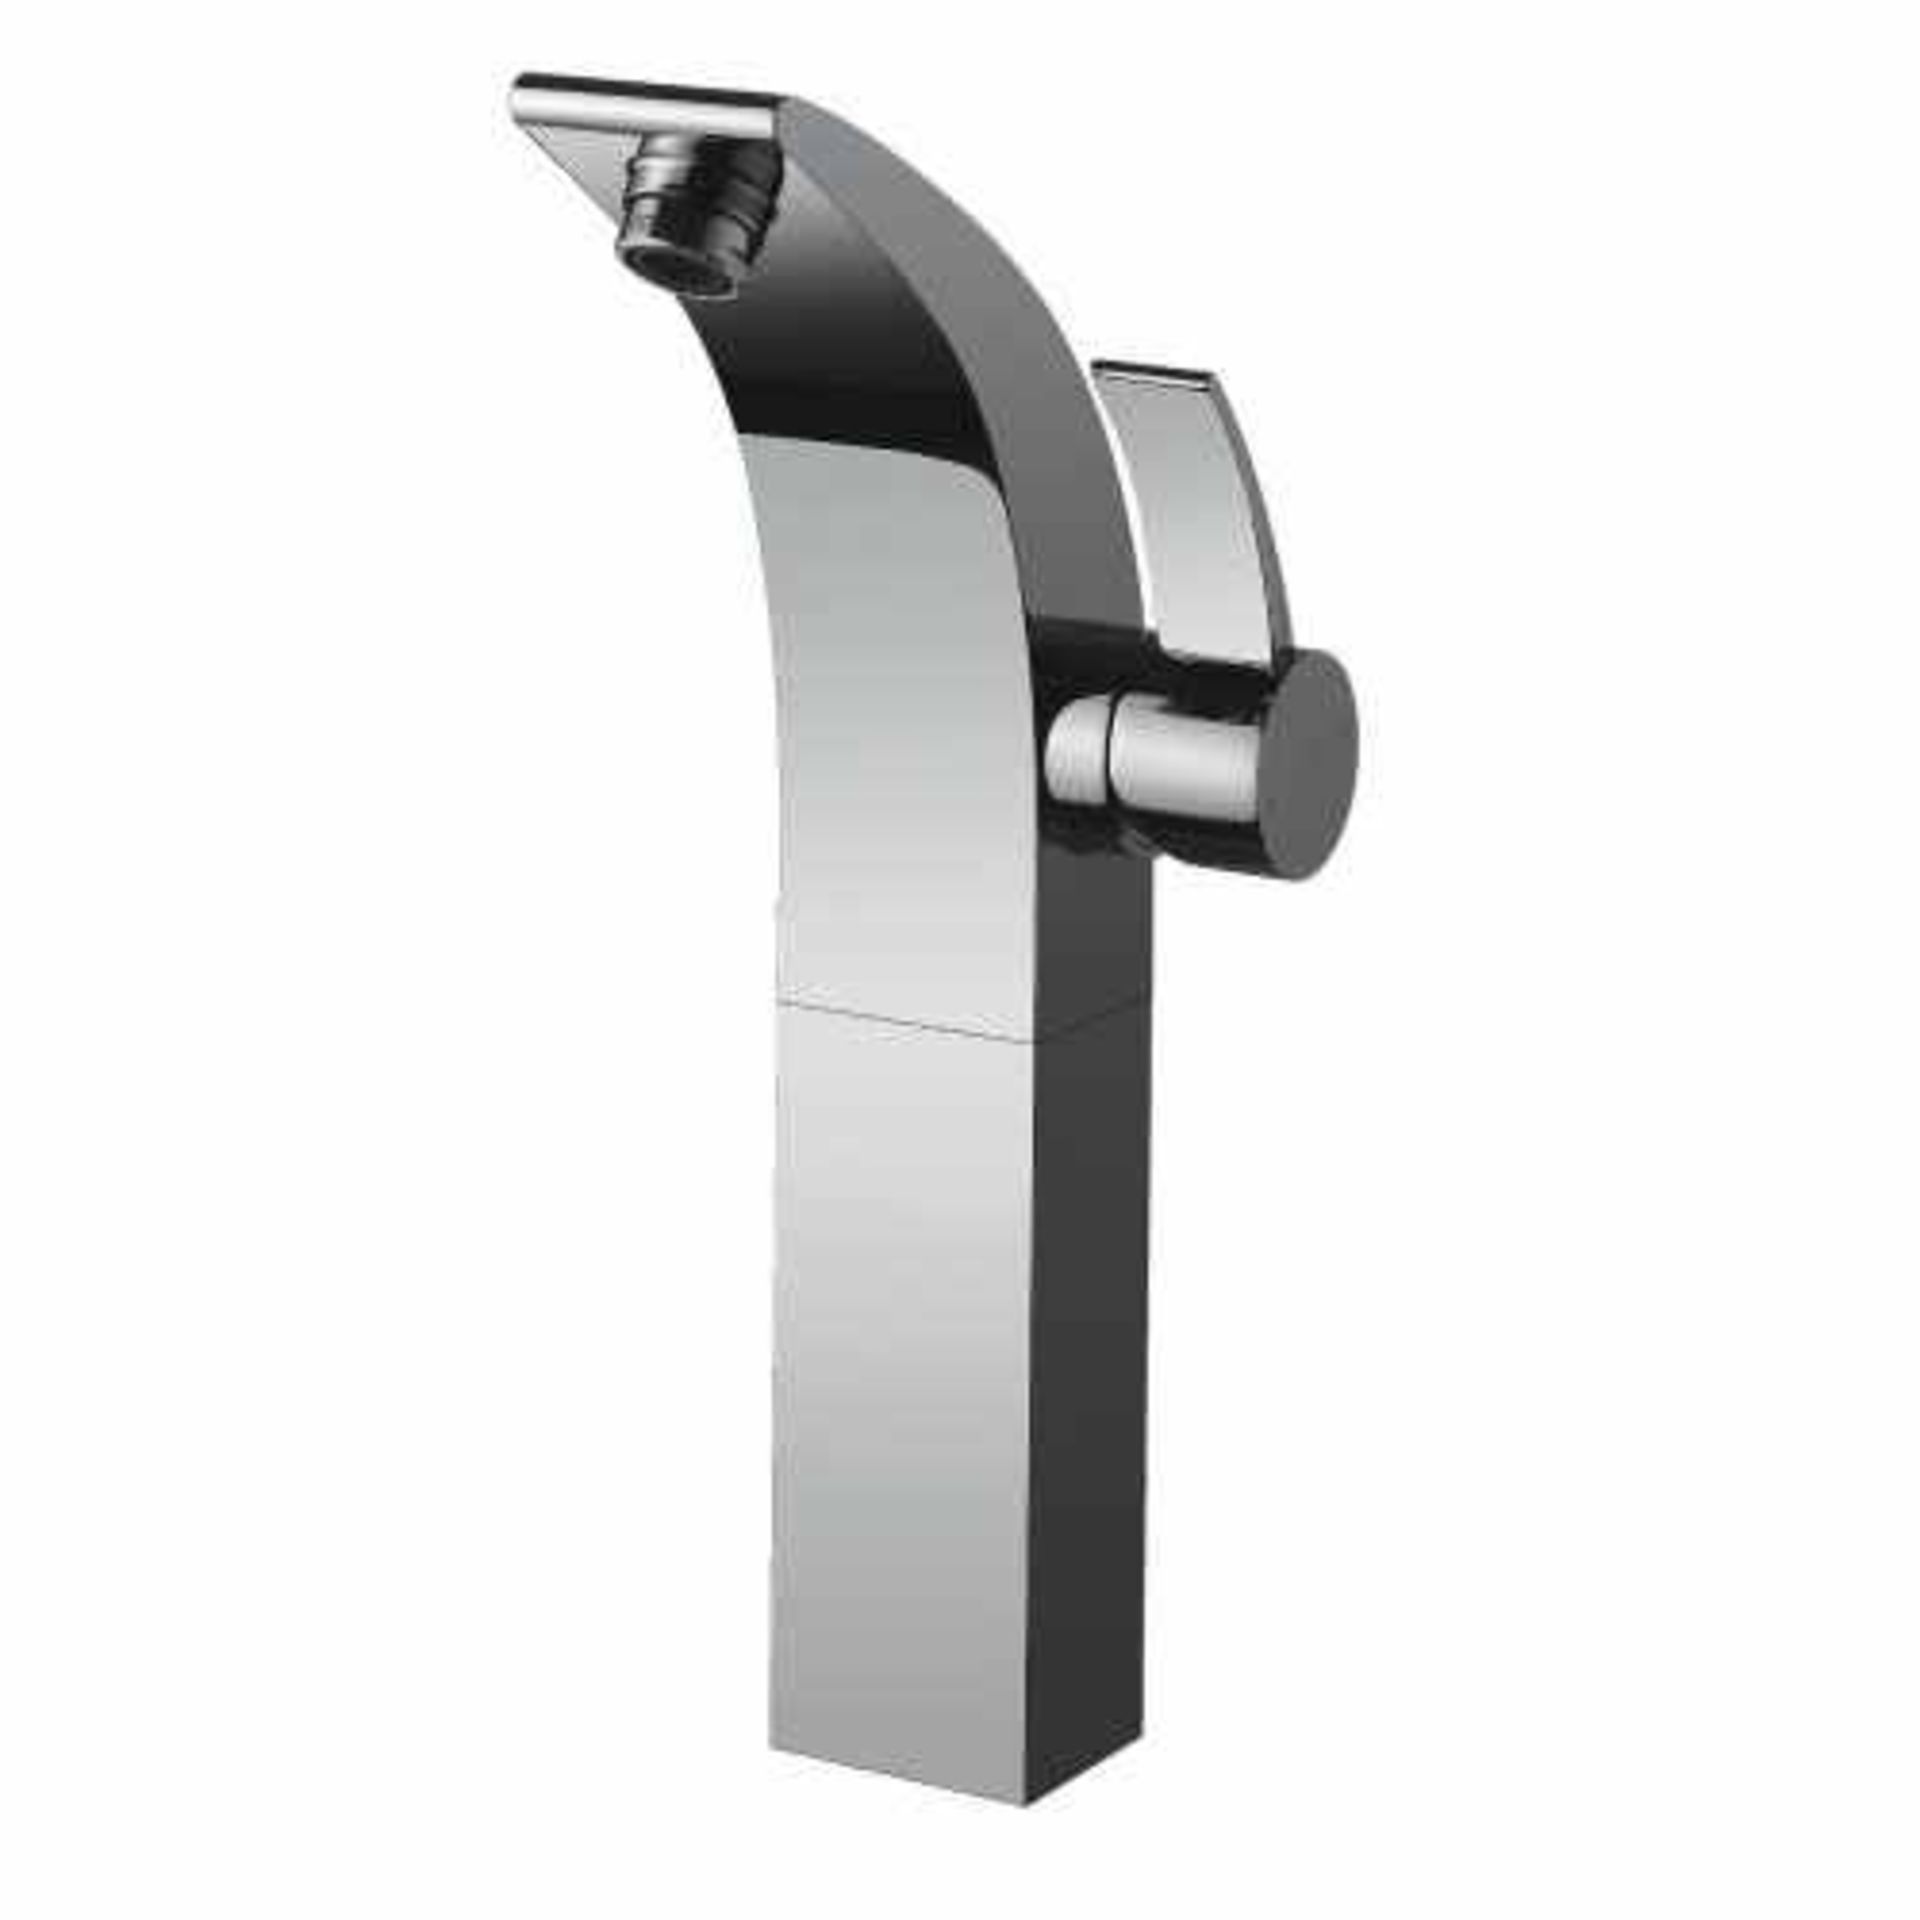 1 X Sublime Bathstore Extended Basin Mono Mixer Tap. Solid Brass Body, Polished Chrome Finish. Very